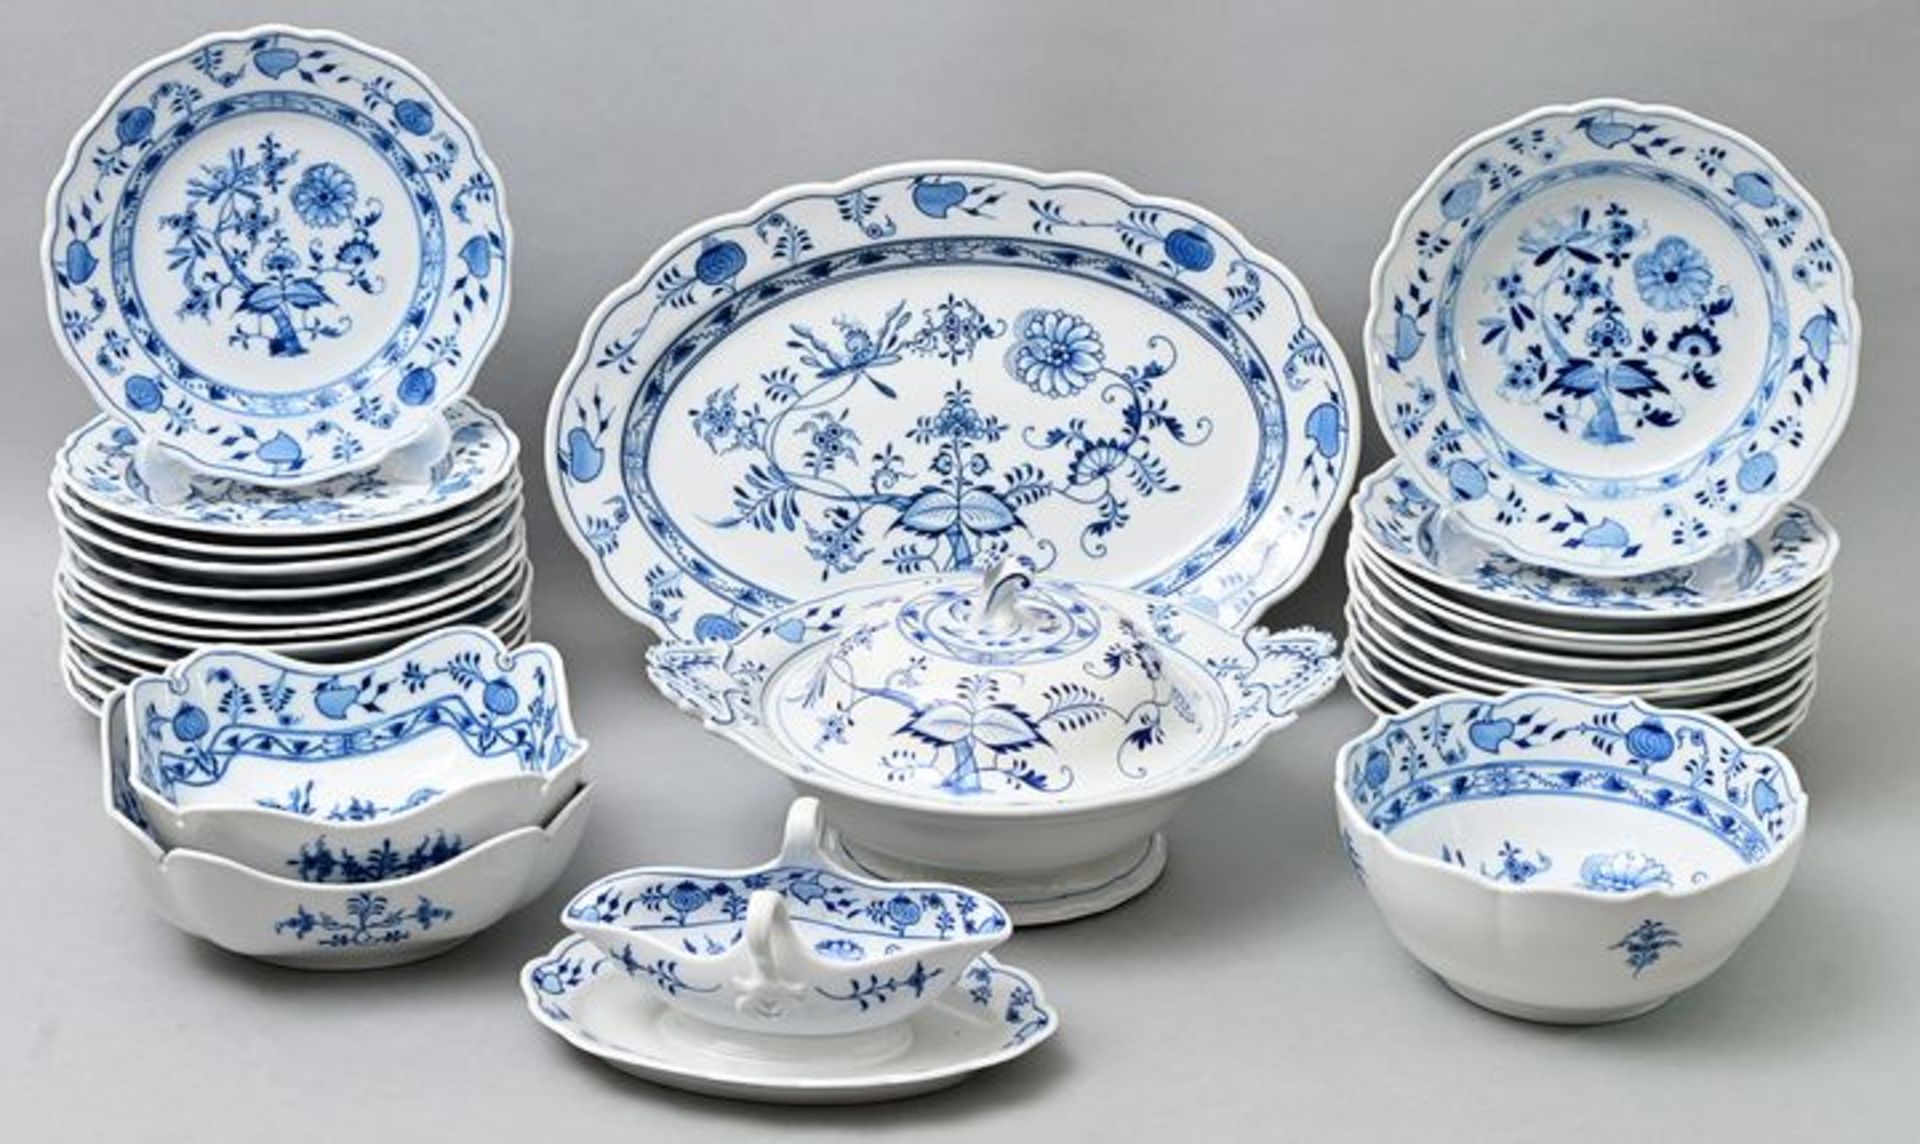 Speiseservice-Teile/ 37 items porcelain - Image 2 of 5